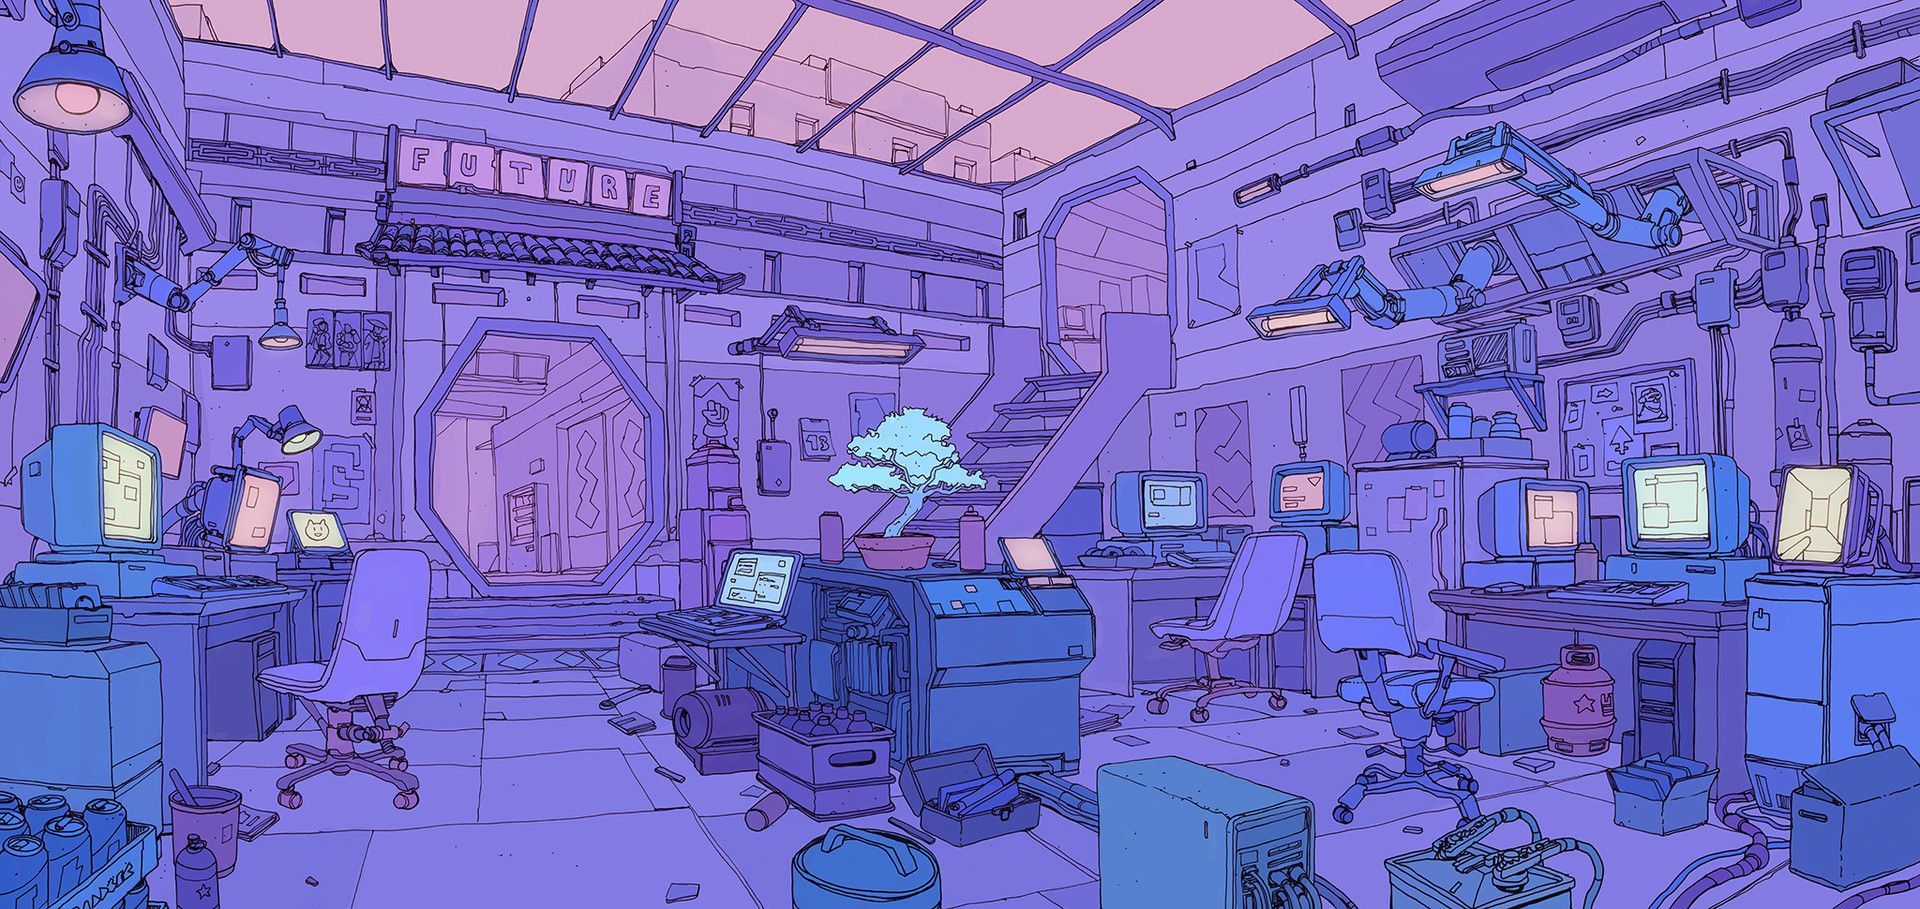 A room filled with computers and a bonsai tree in the center. - Illustration